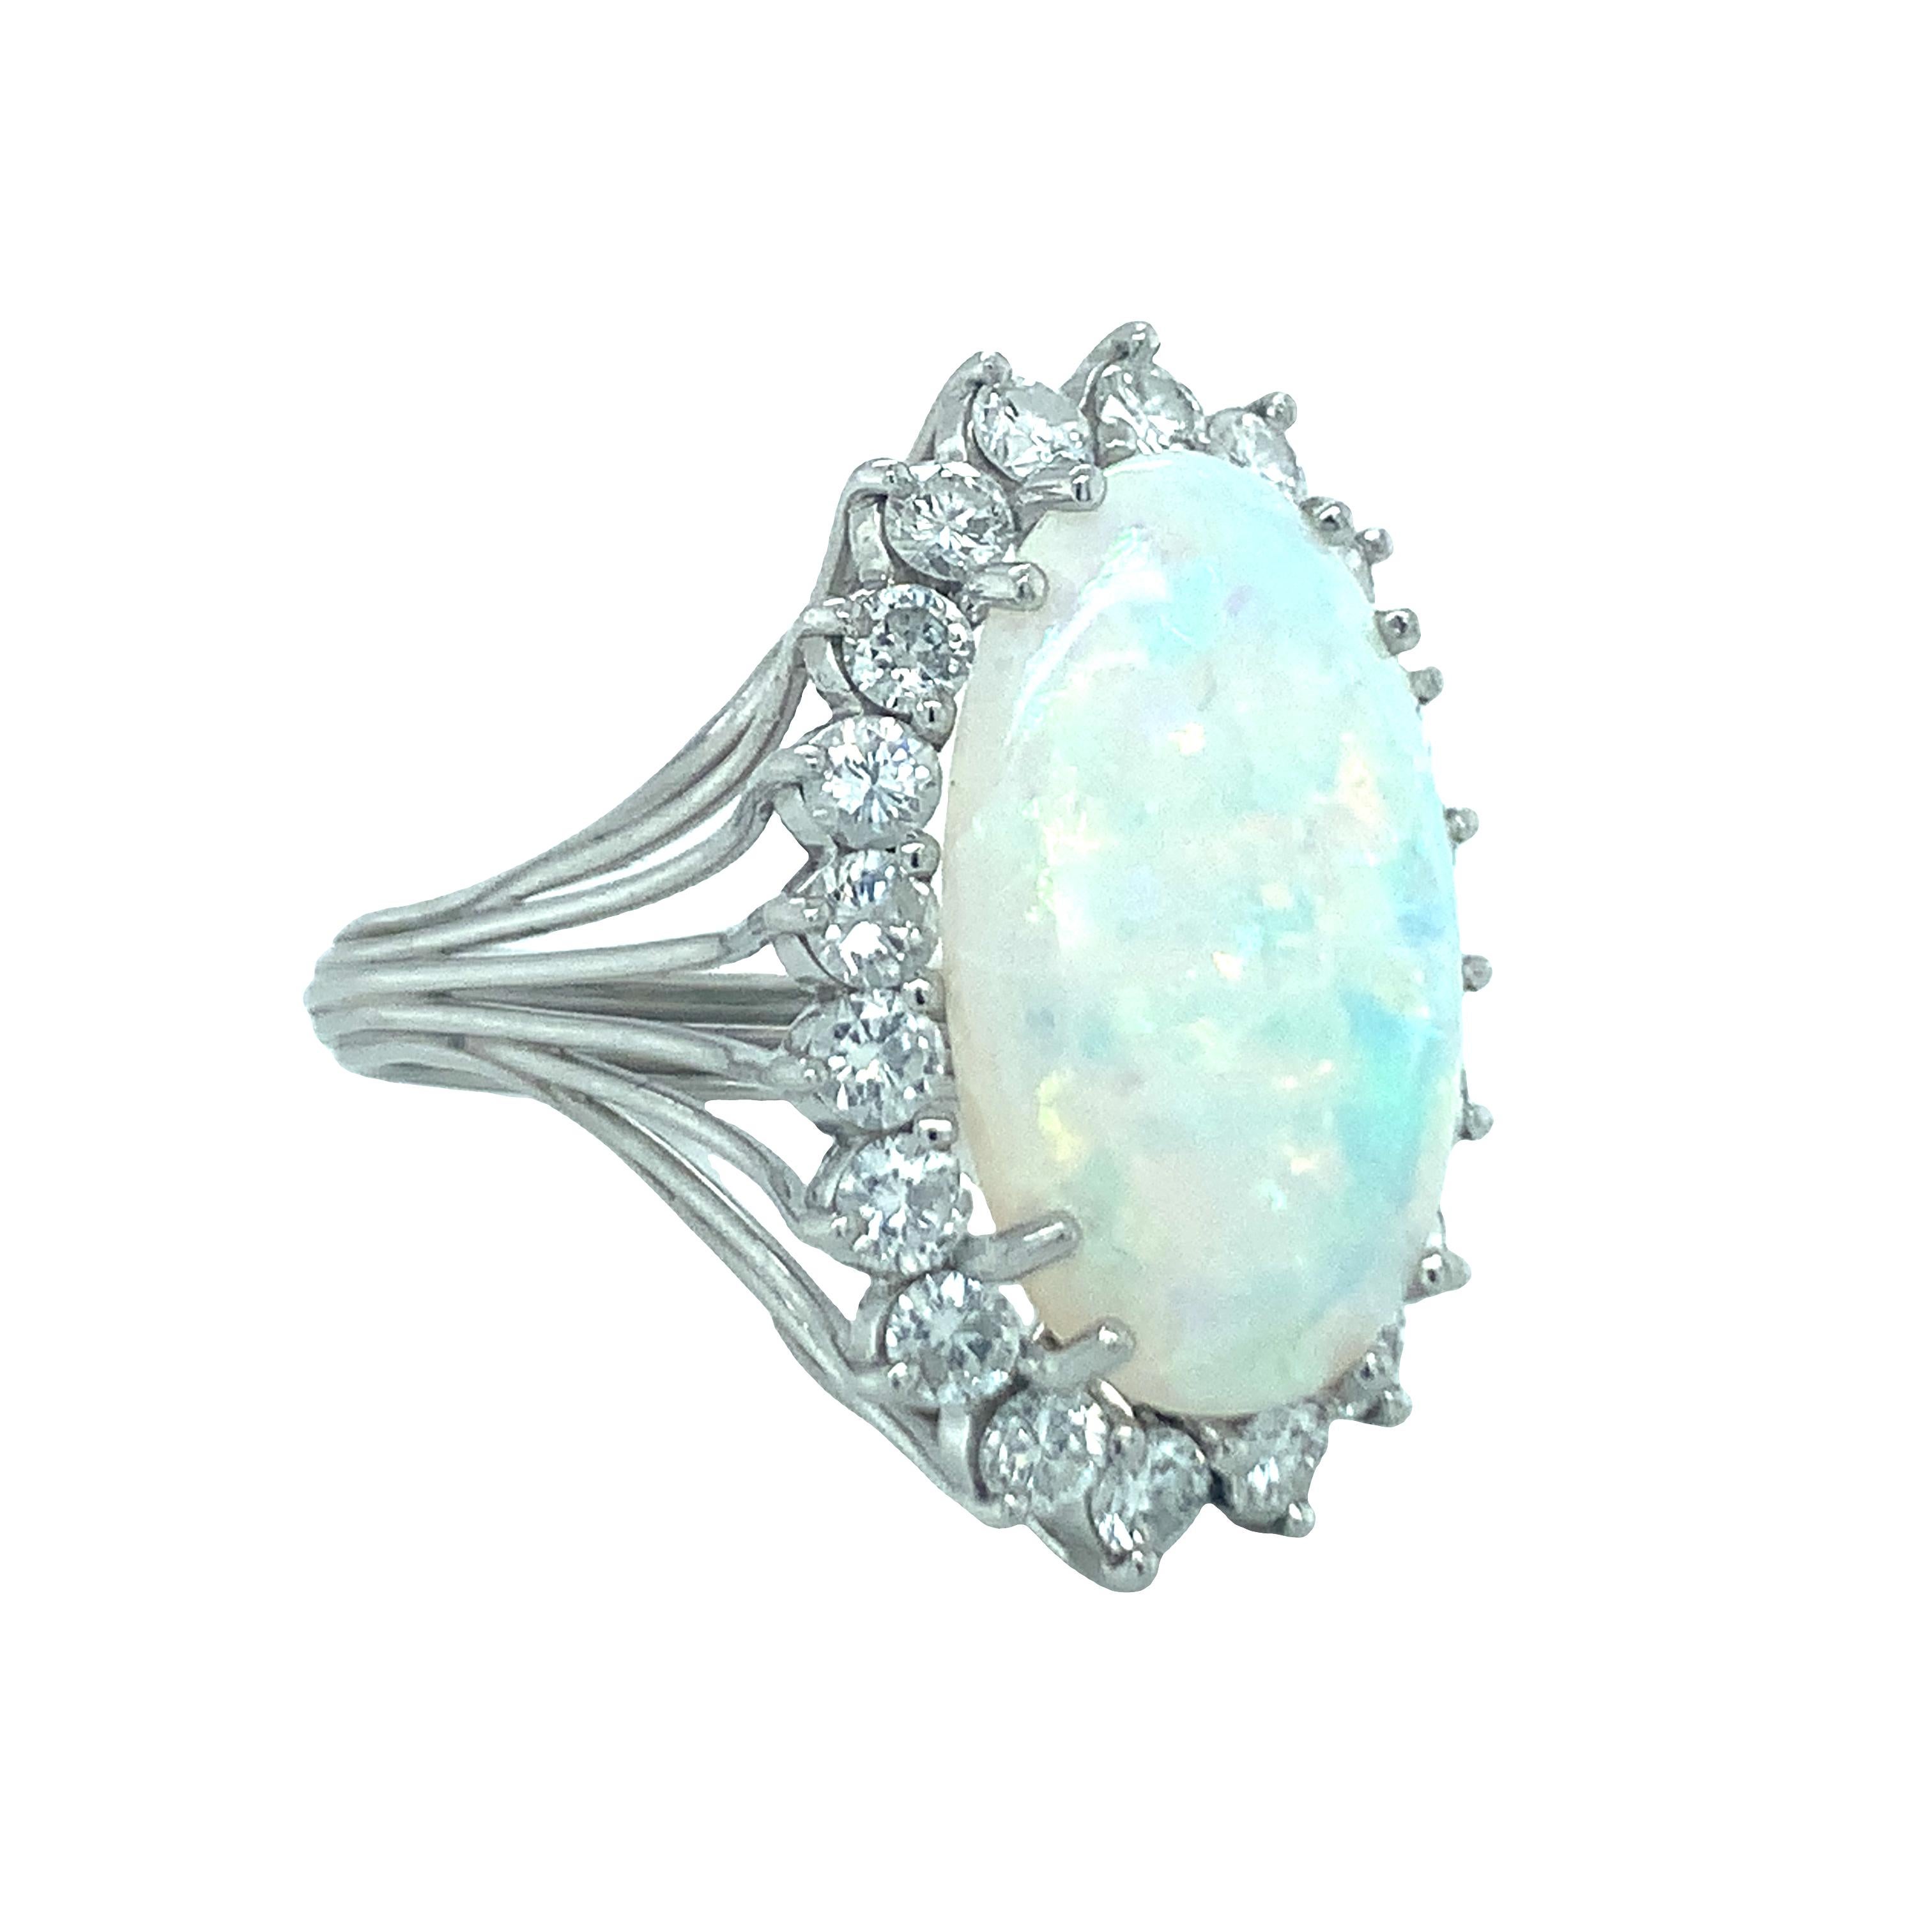 One mid-century white opal and diamond platinum ring centering one oval cabochon white opal weighing 5.75 ct. surrounded by twenty round brilliant cut diamonds weighing 1.25 ct. with G-H color and SI-1 clarity. Circa 1950s.

Vibrant, dancing,